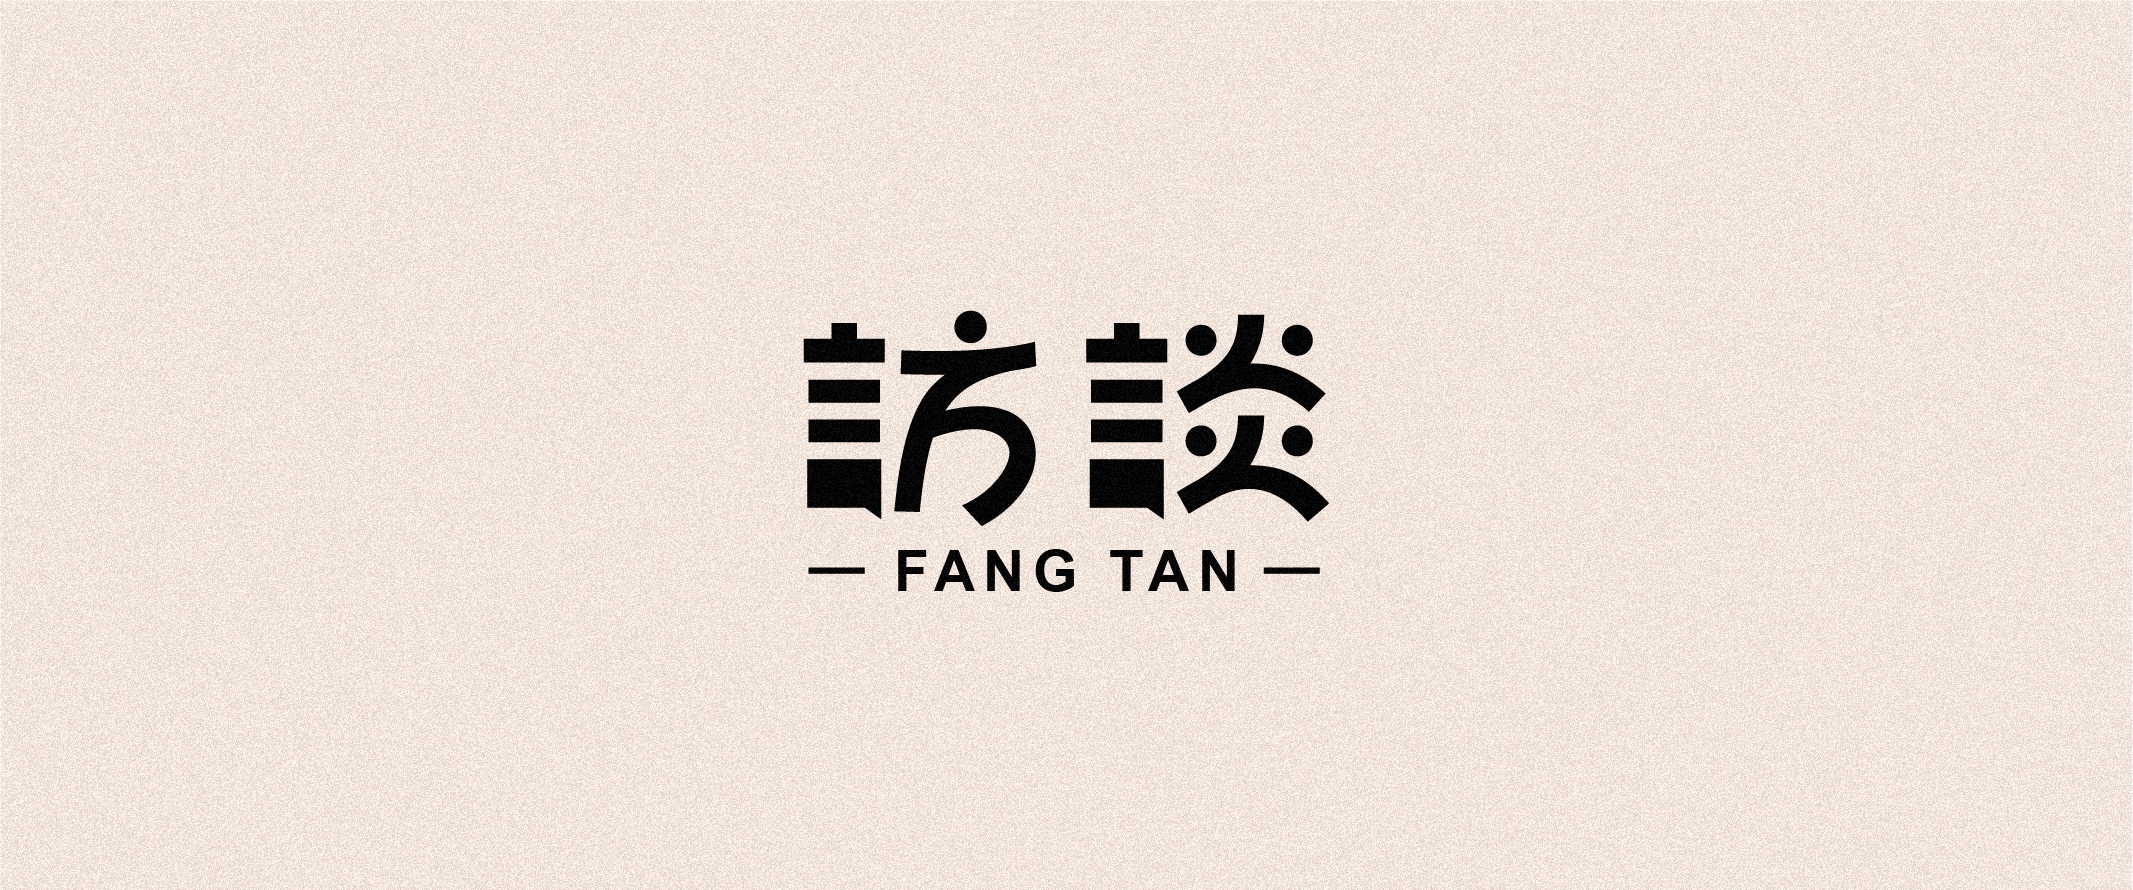 33P Chinese font design collection inspiration #.139